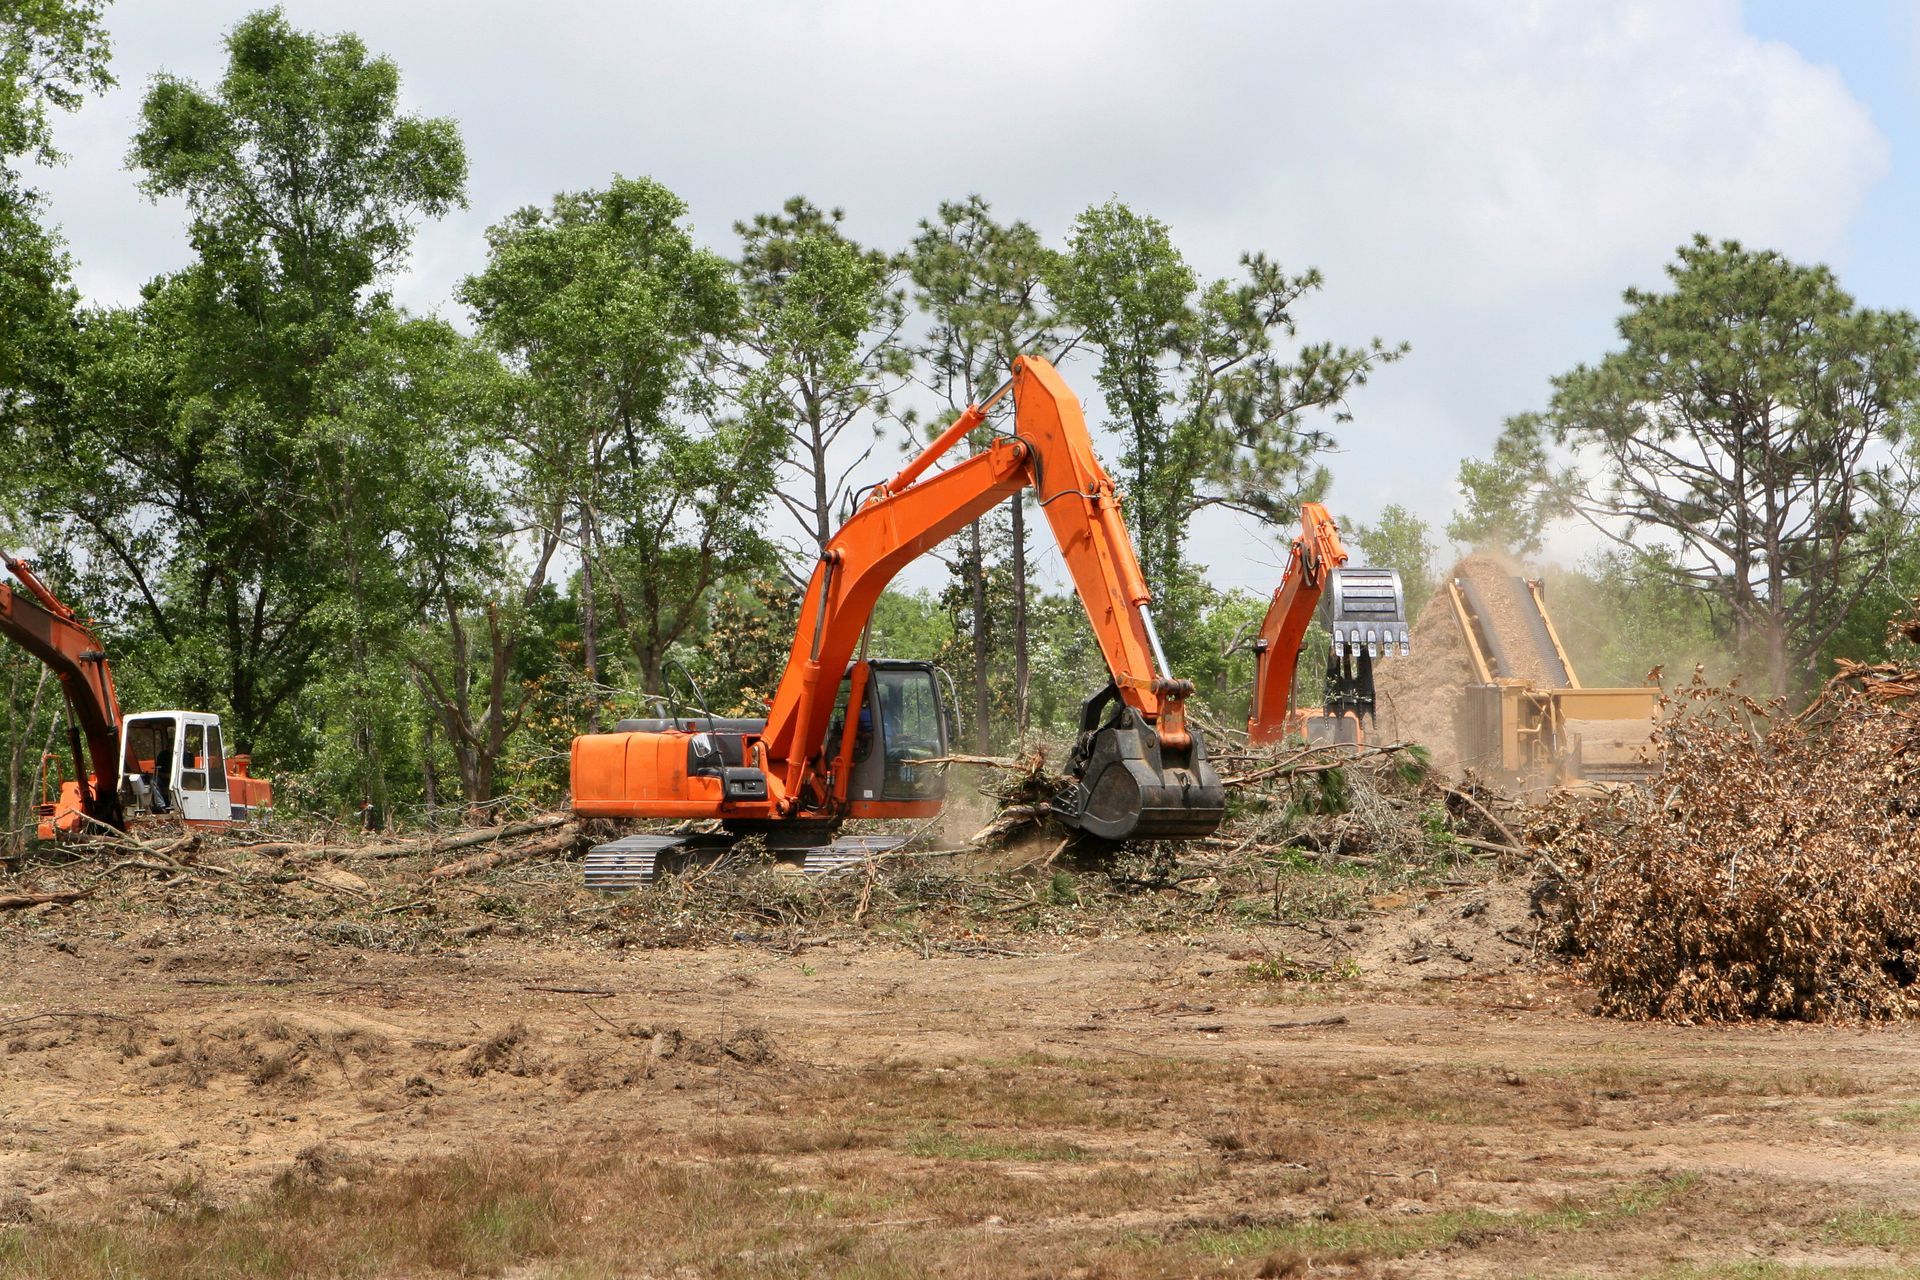 two excavators are working in a field with trees in the background .